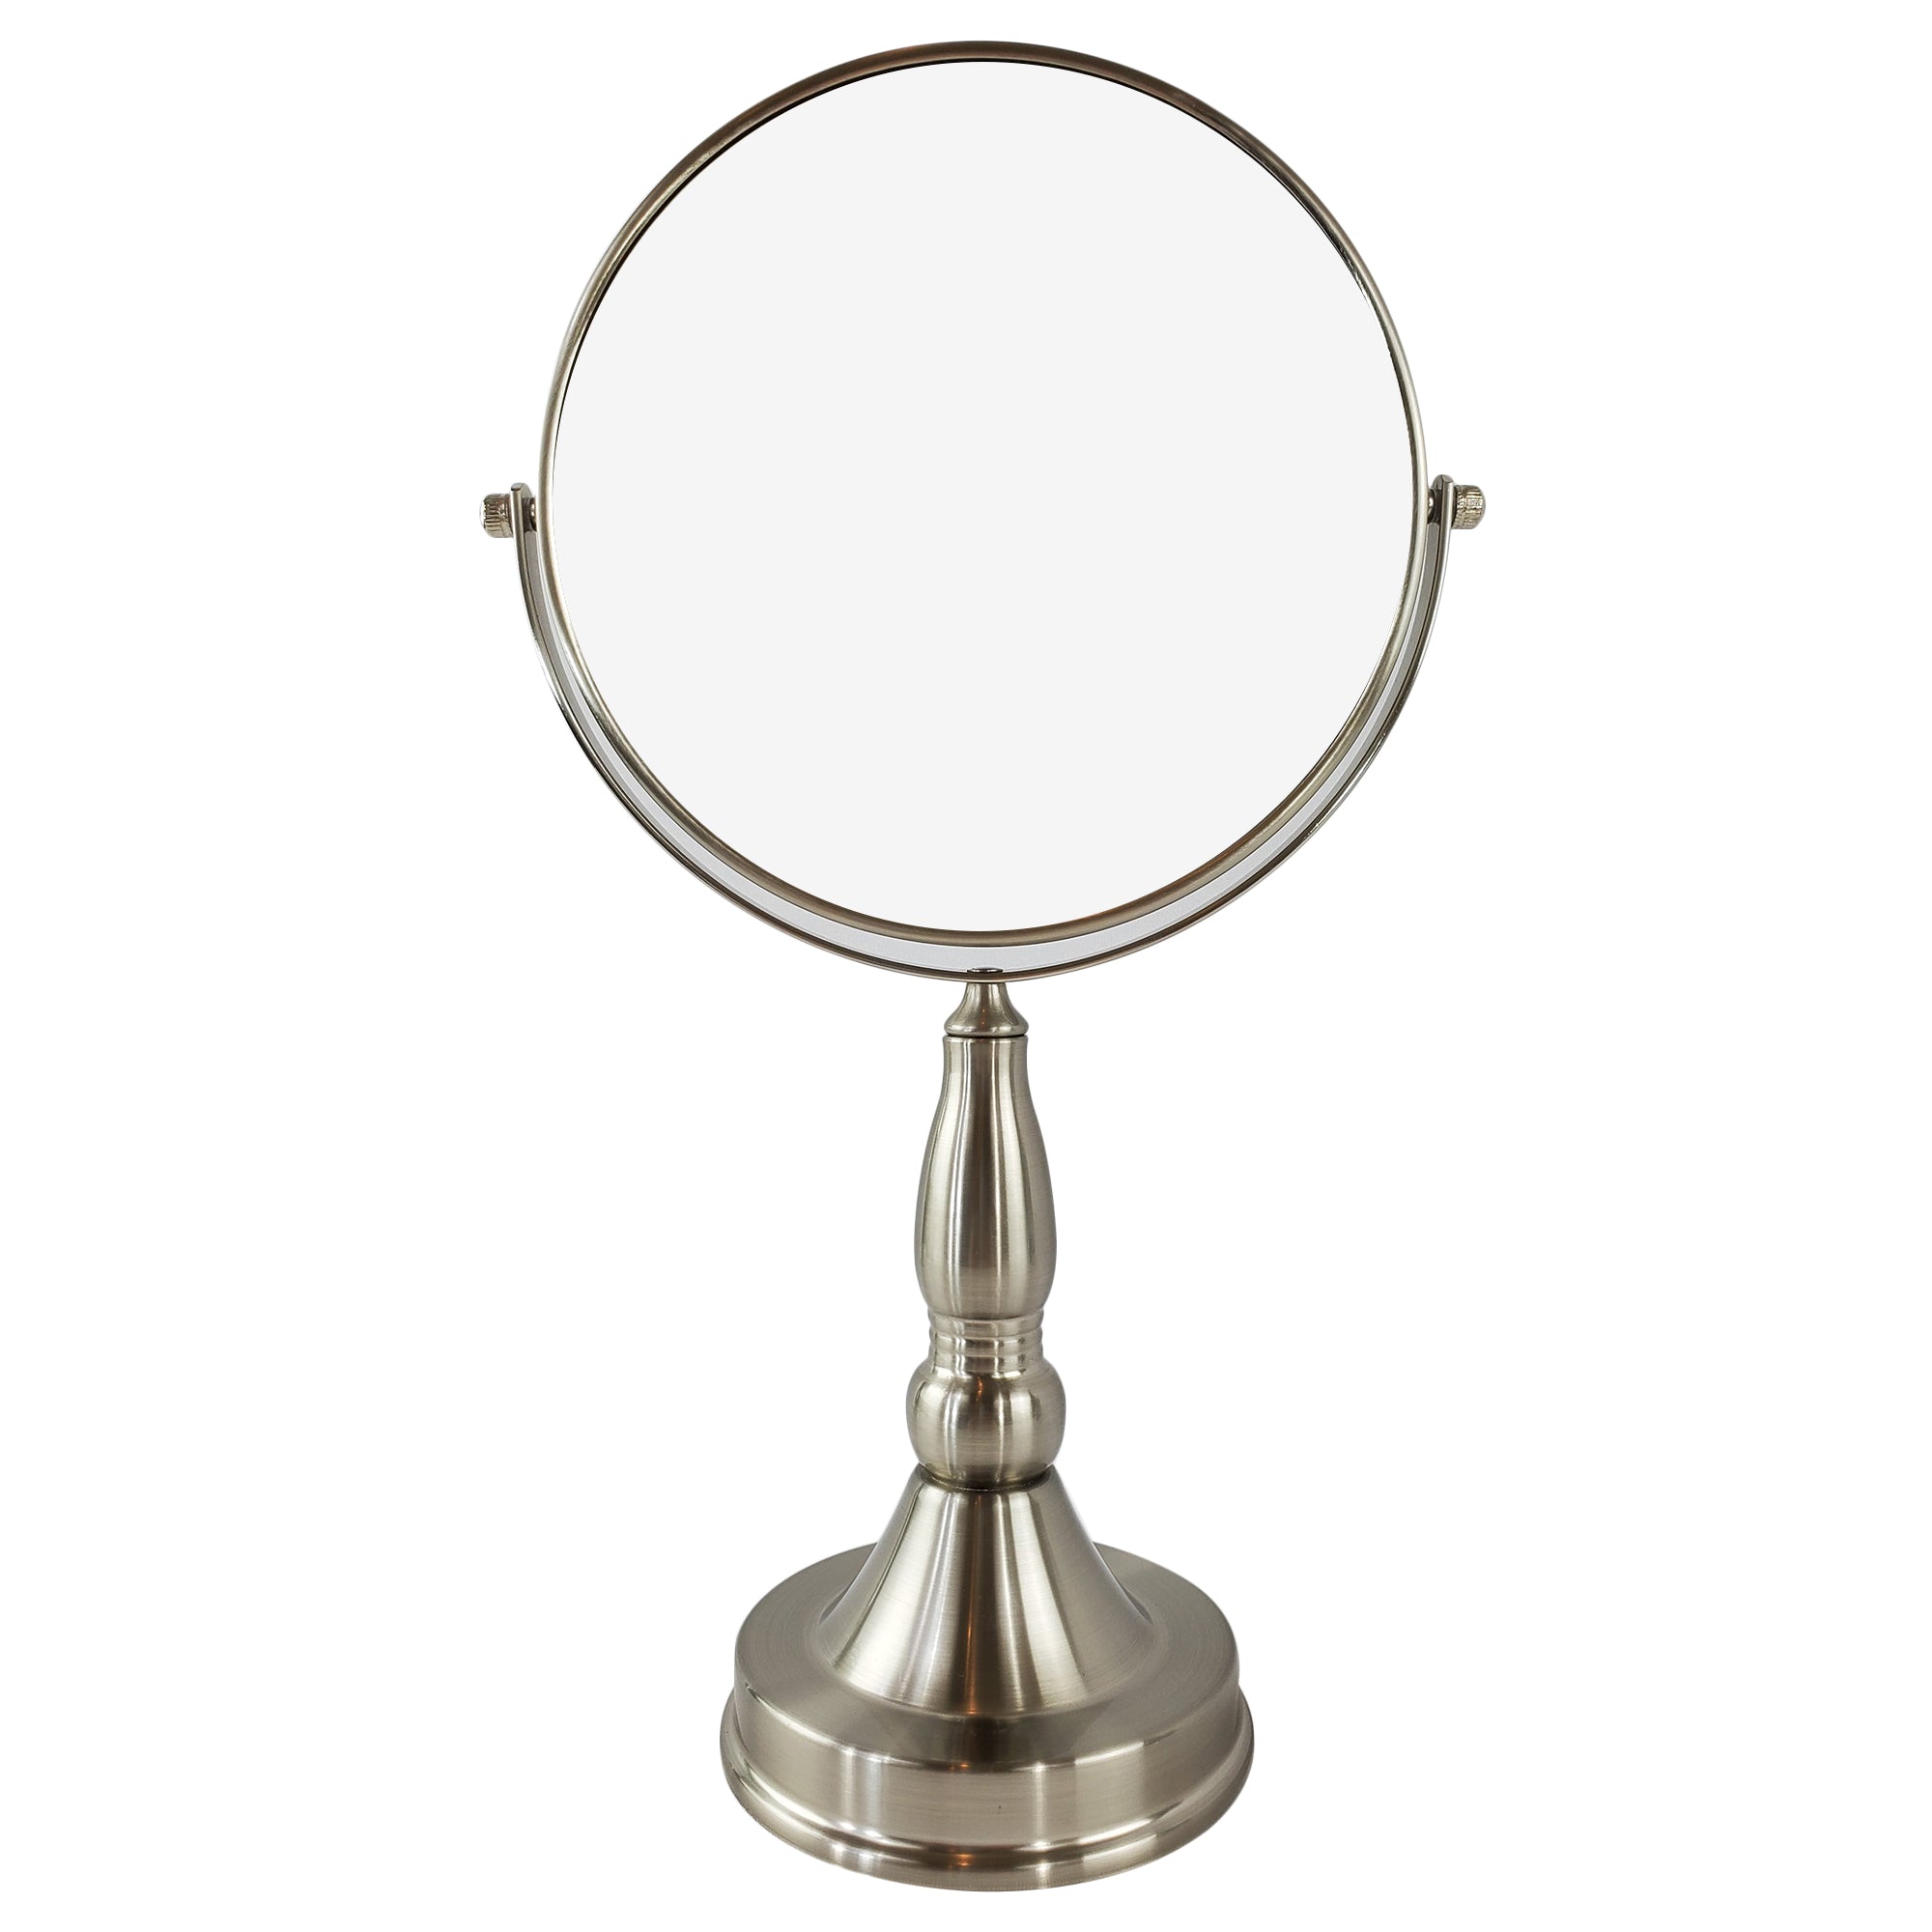 Magnifying Make Up Vanity Mirror With Satin Nickel Plated Finish (M922)